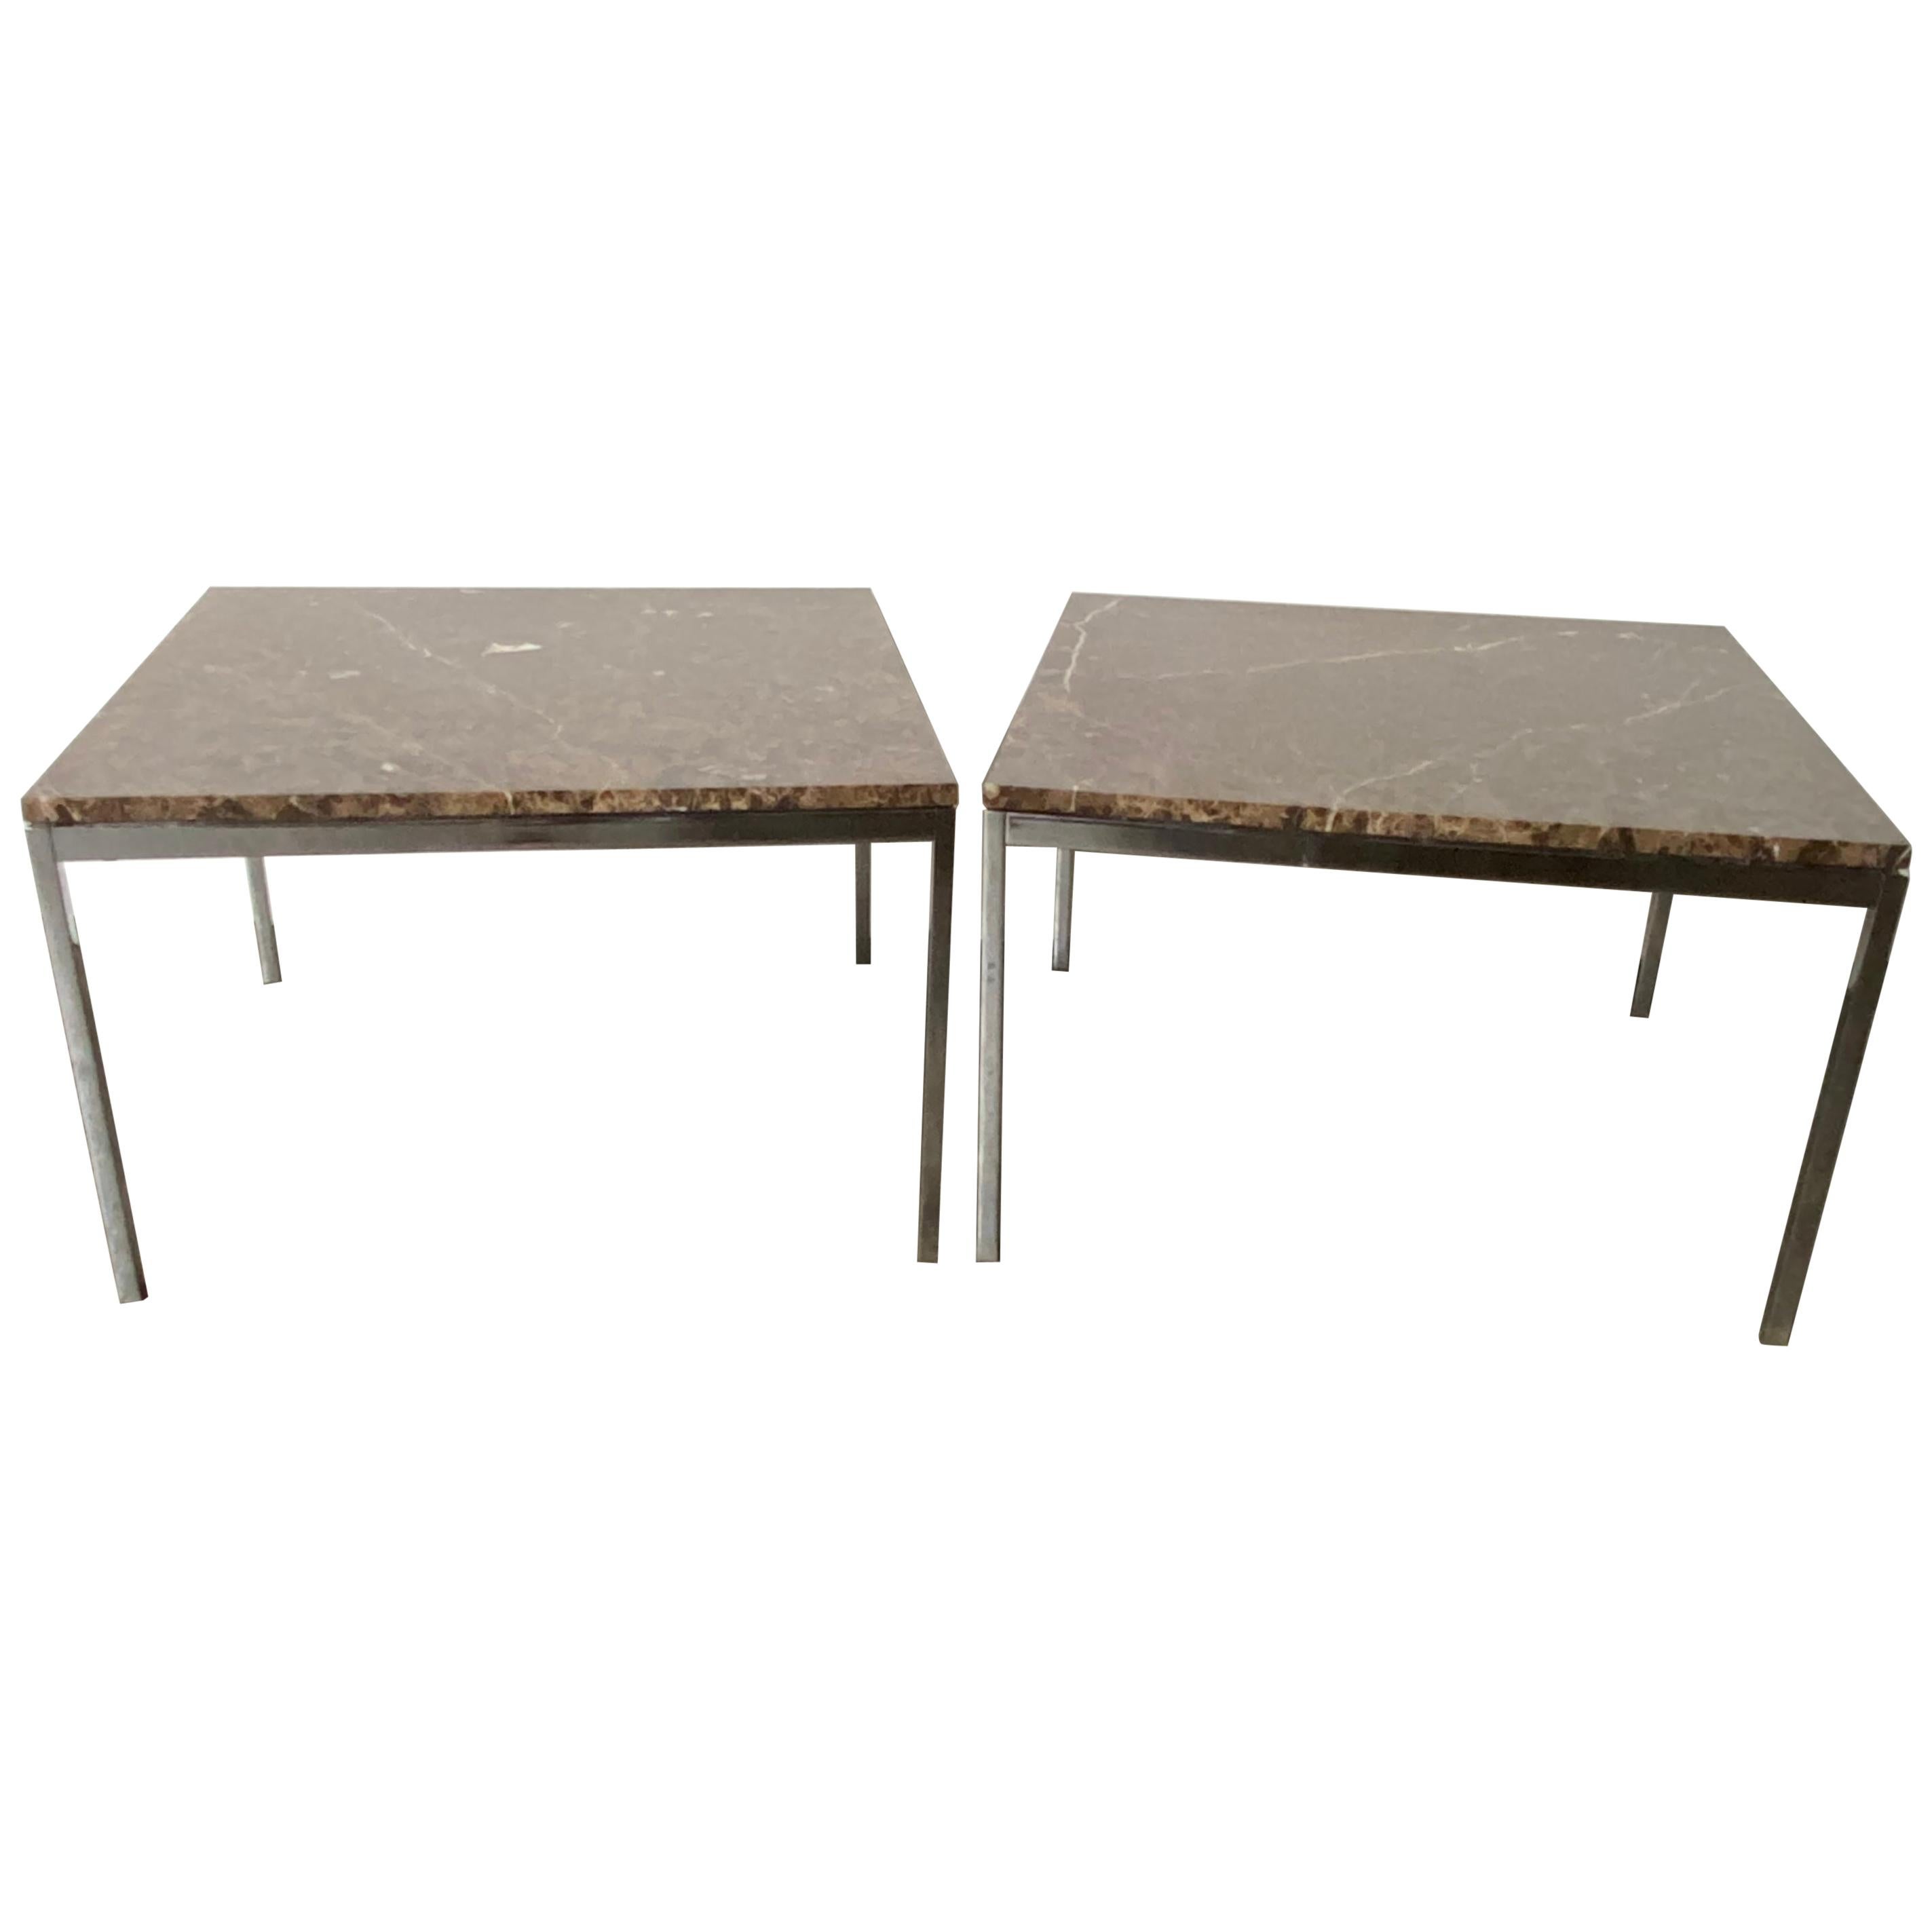 Spectacular Matched Pair of Florence Knoll End Tables